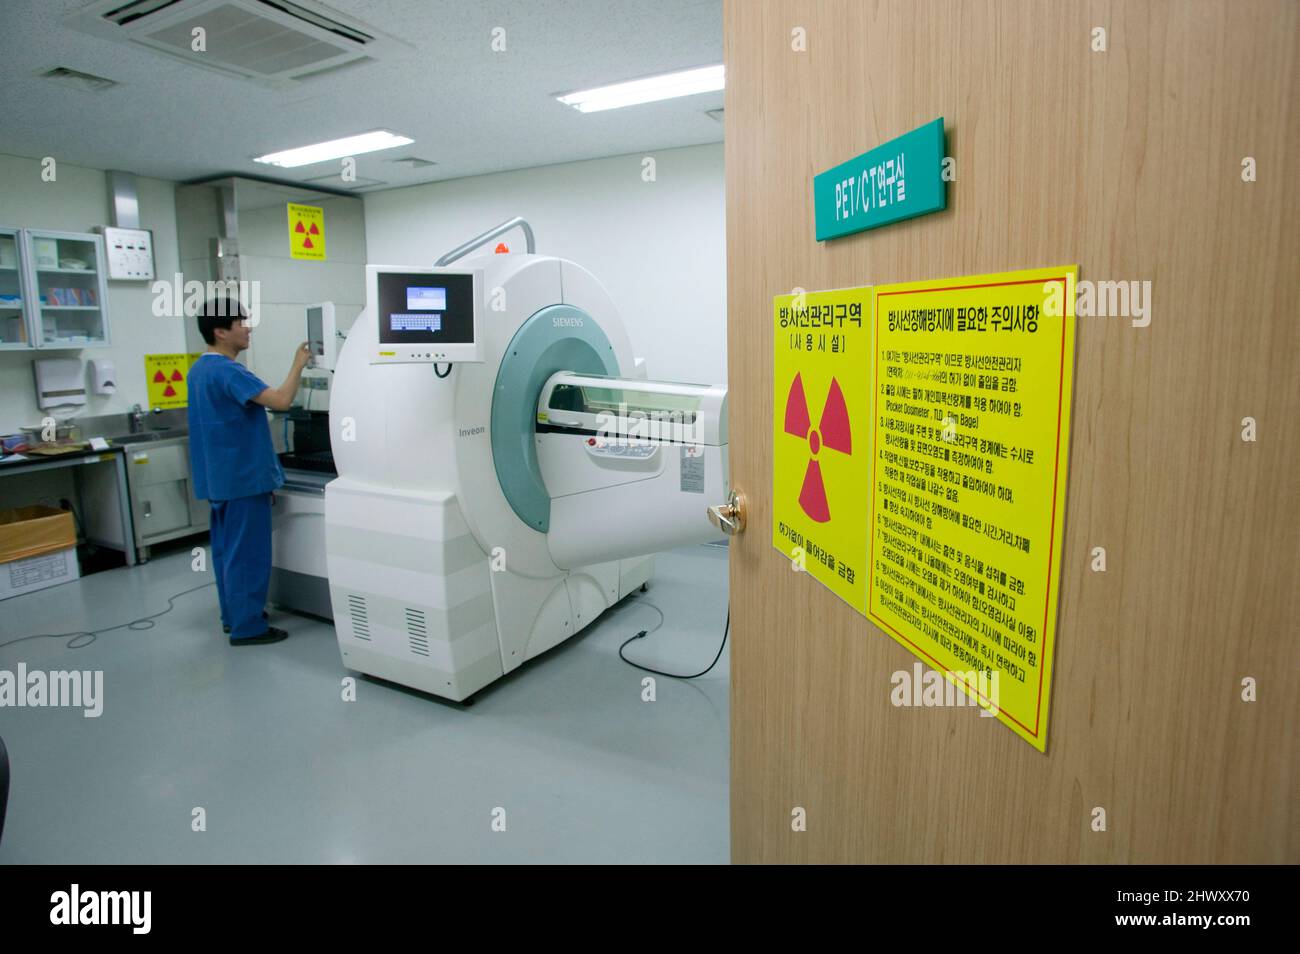 The entrance to a medical imaging research room at The Samsung Medical center, Seoul. The Micro PET machine is used to scan mice in aid research to im Stock Photo